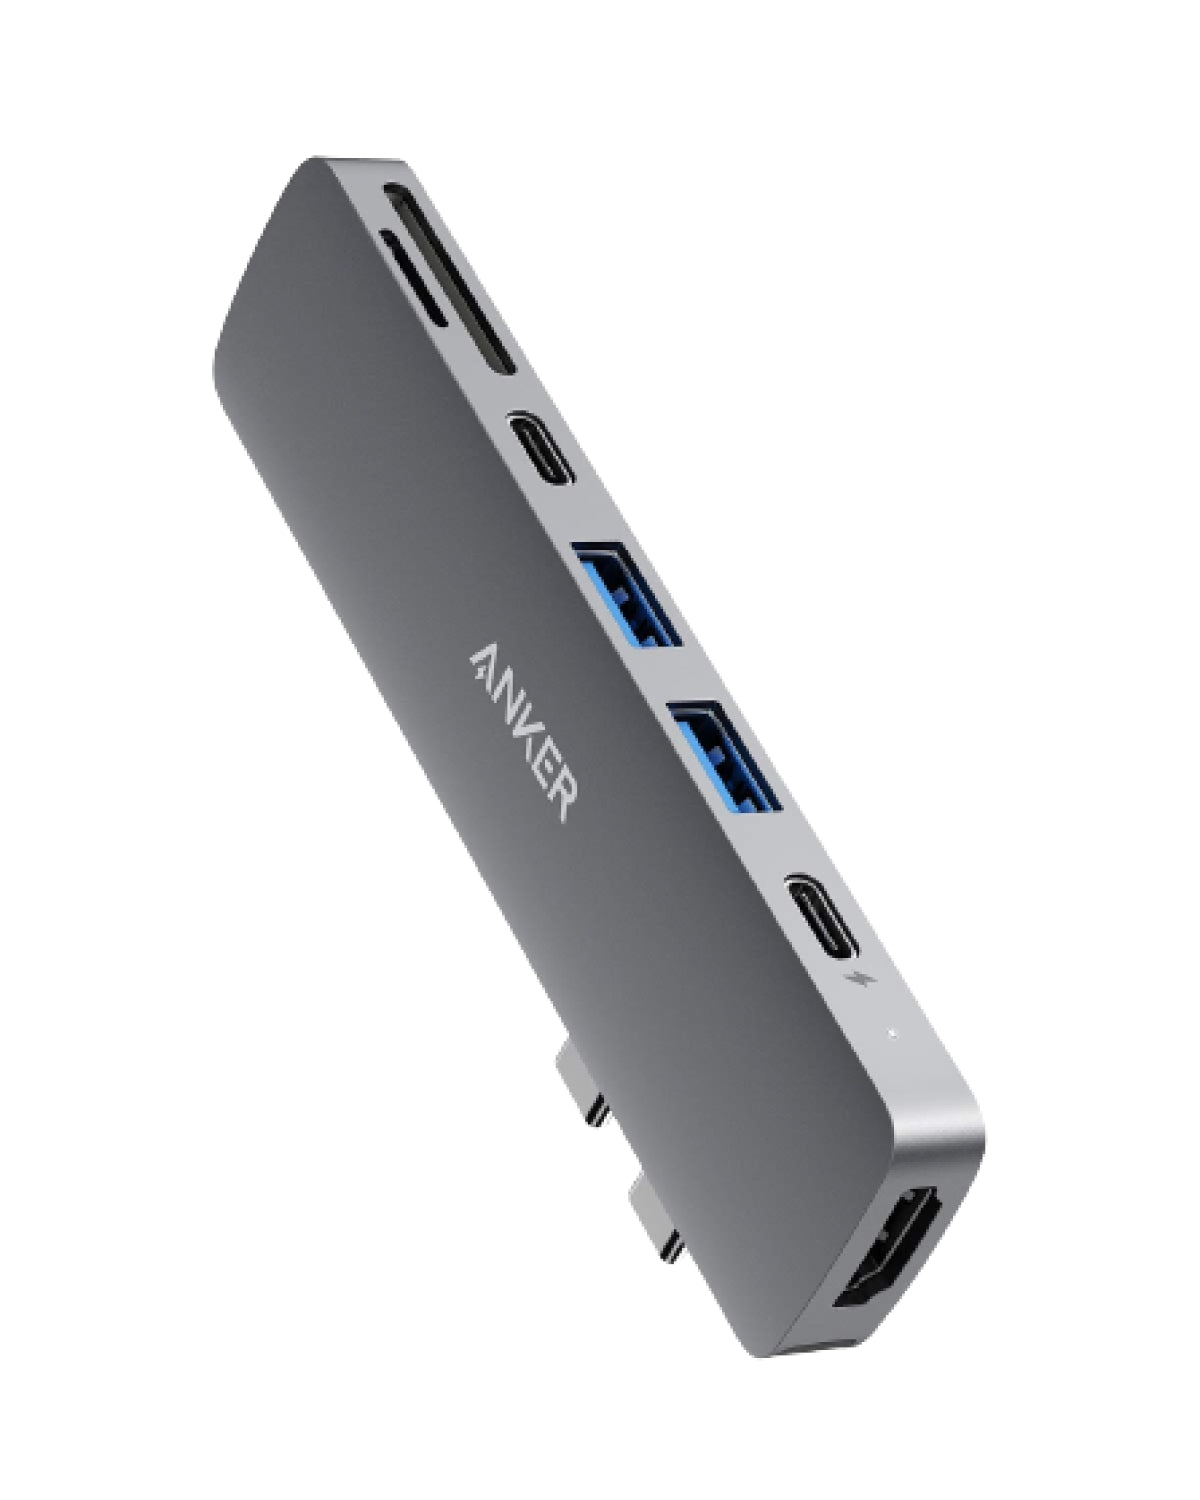 The Best USB C Hub of 2023 - What to Look For & Top Picks - Anker US